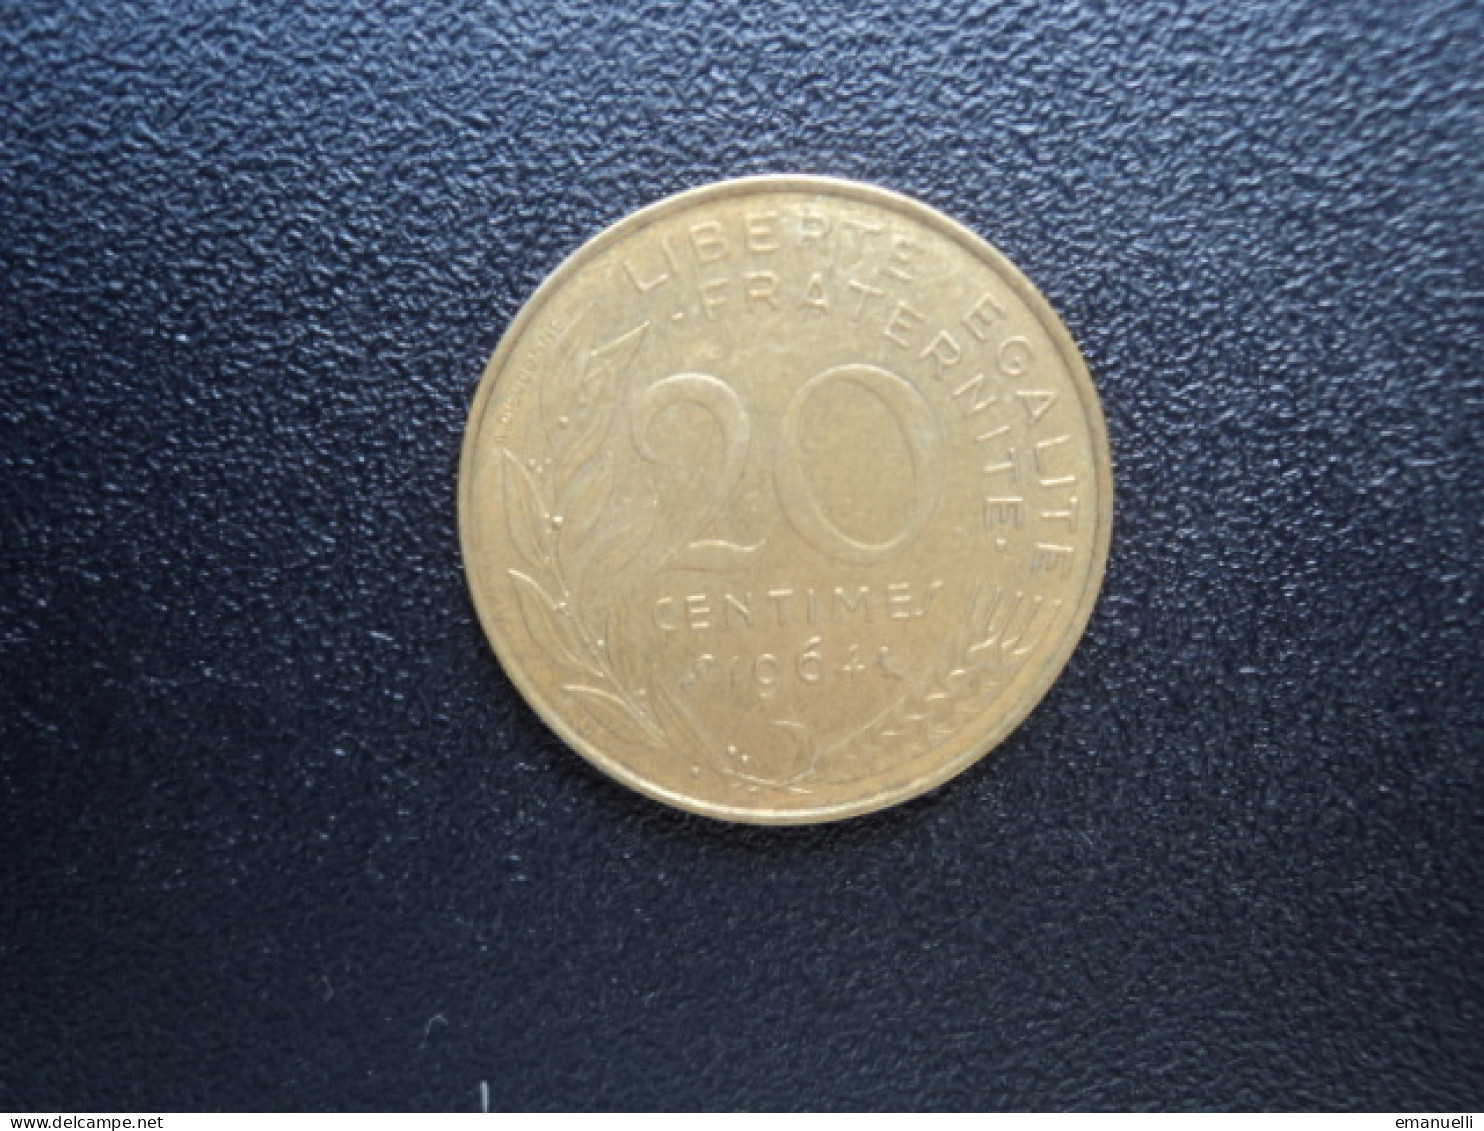 FRANCE : 20 CENTIMES  1964    F.156 / G.332 / KM 930     SUP - 20 Centimes